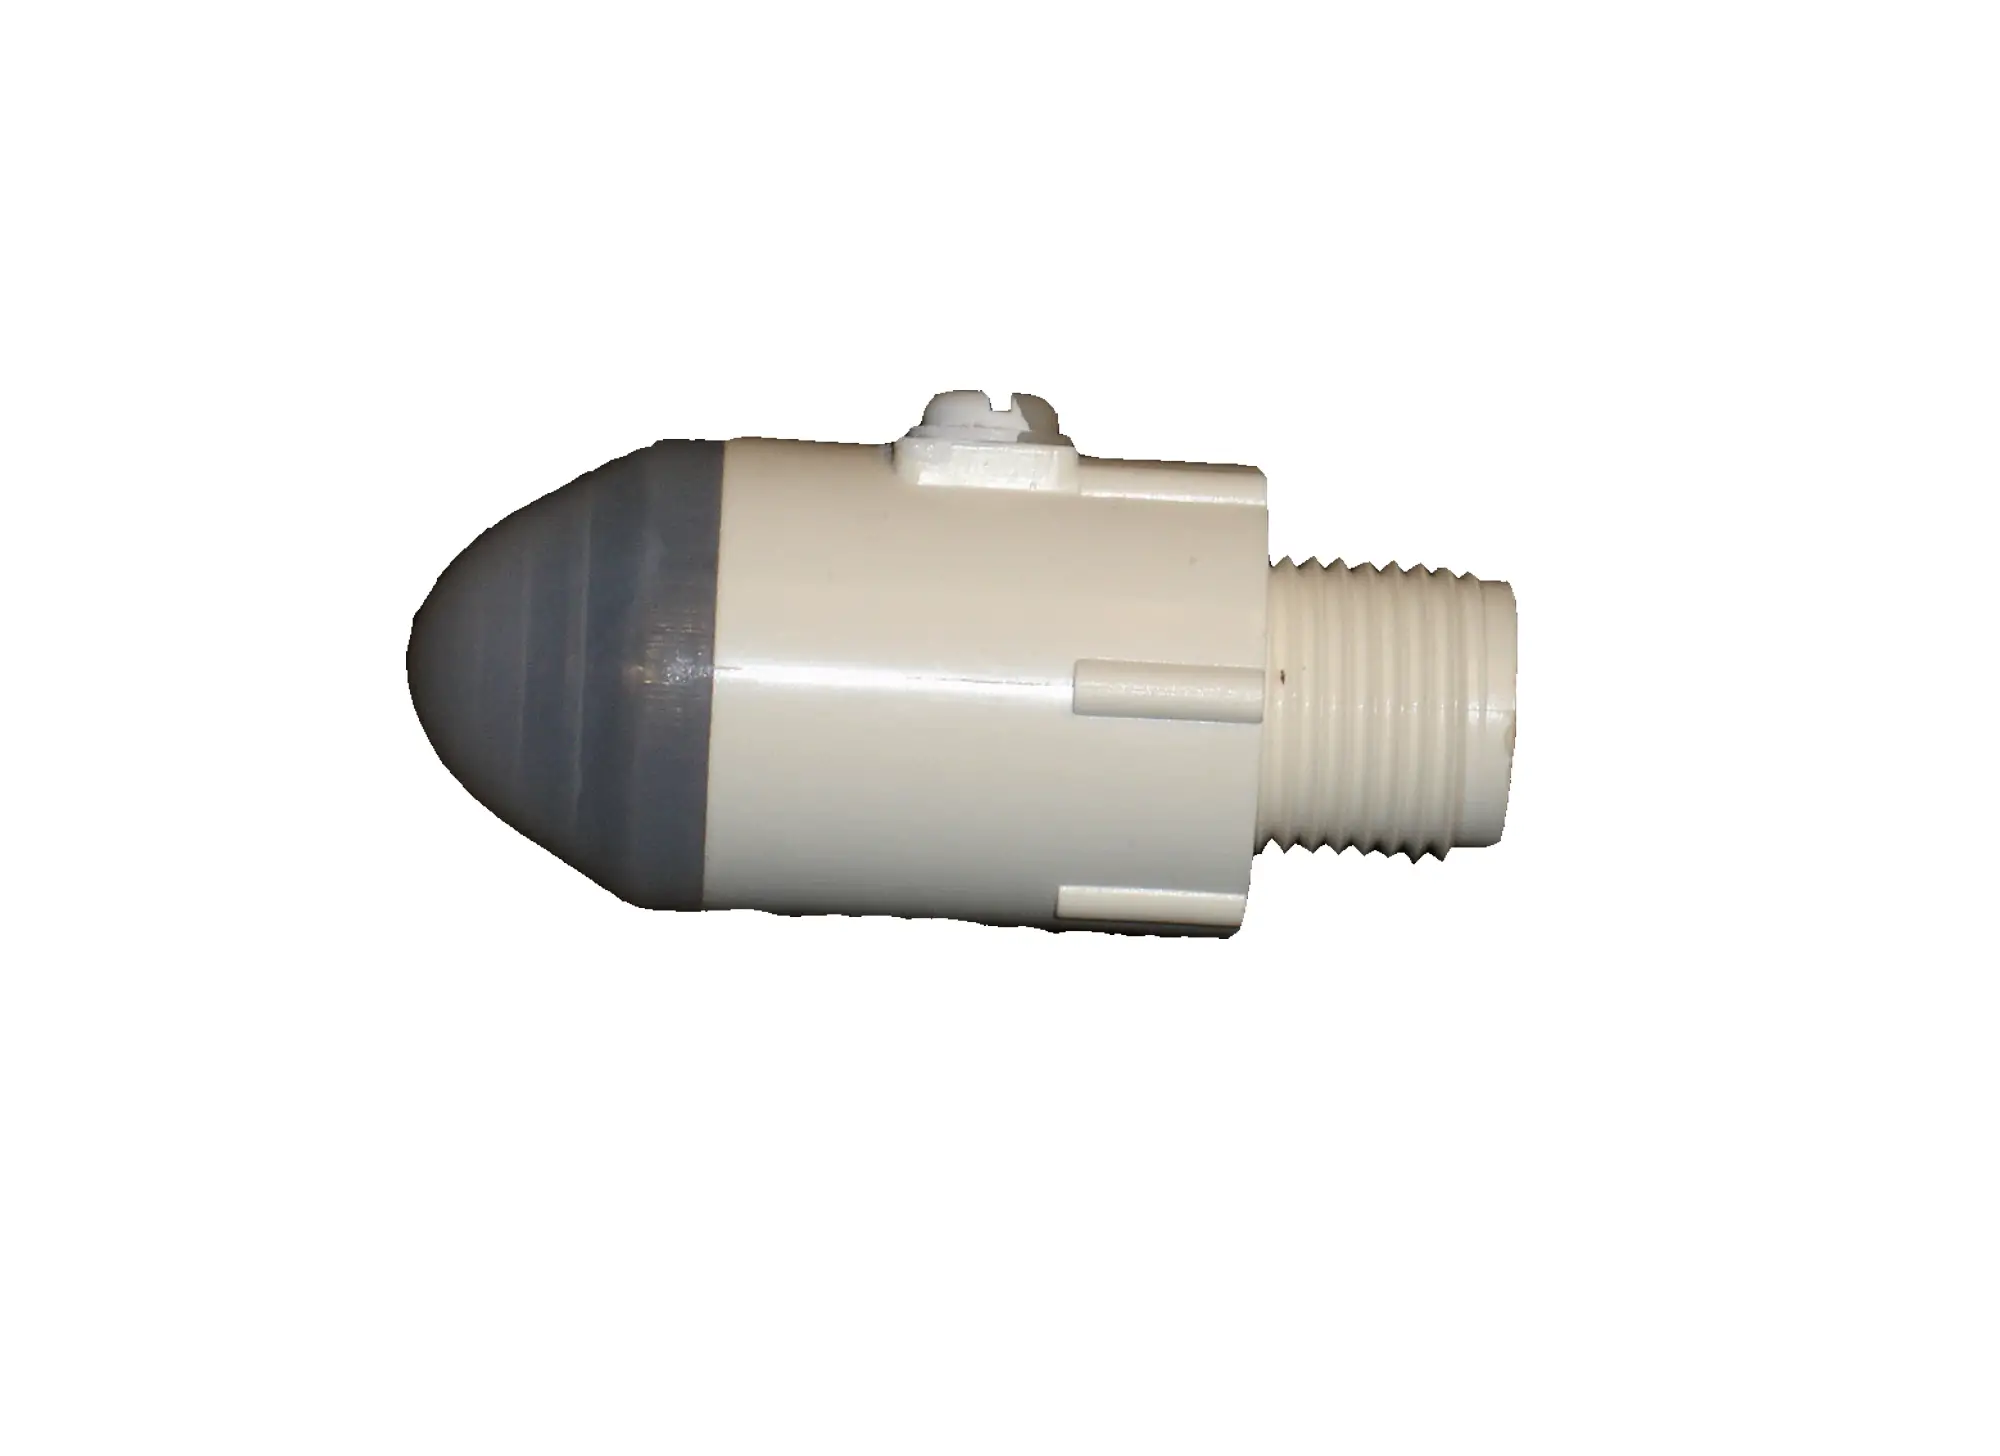 LMPO-200 DLM Outdoor Photocell